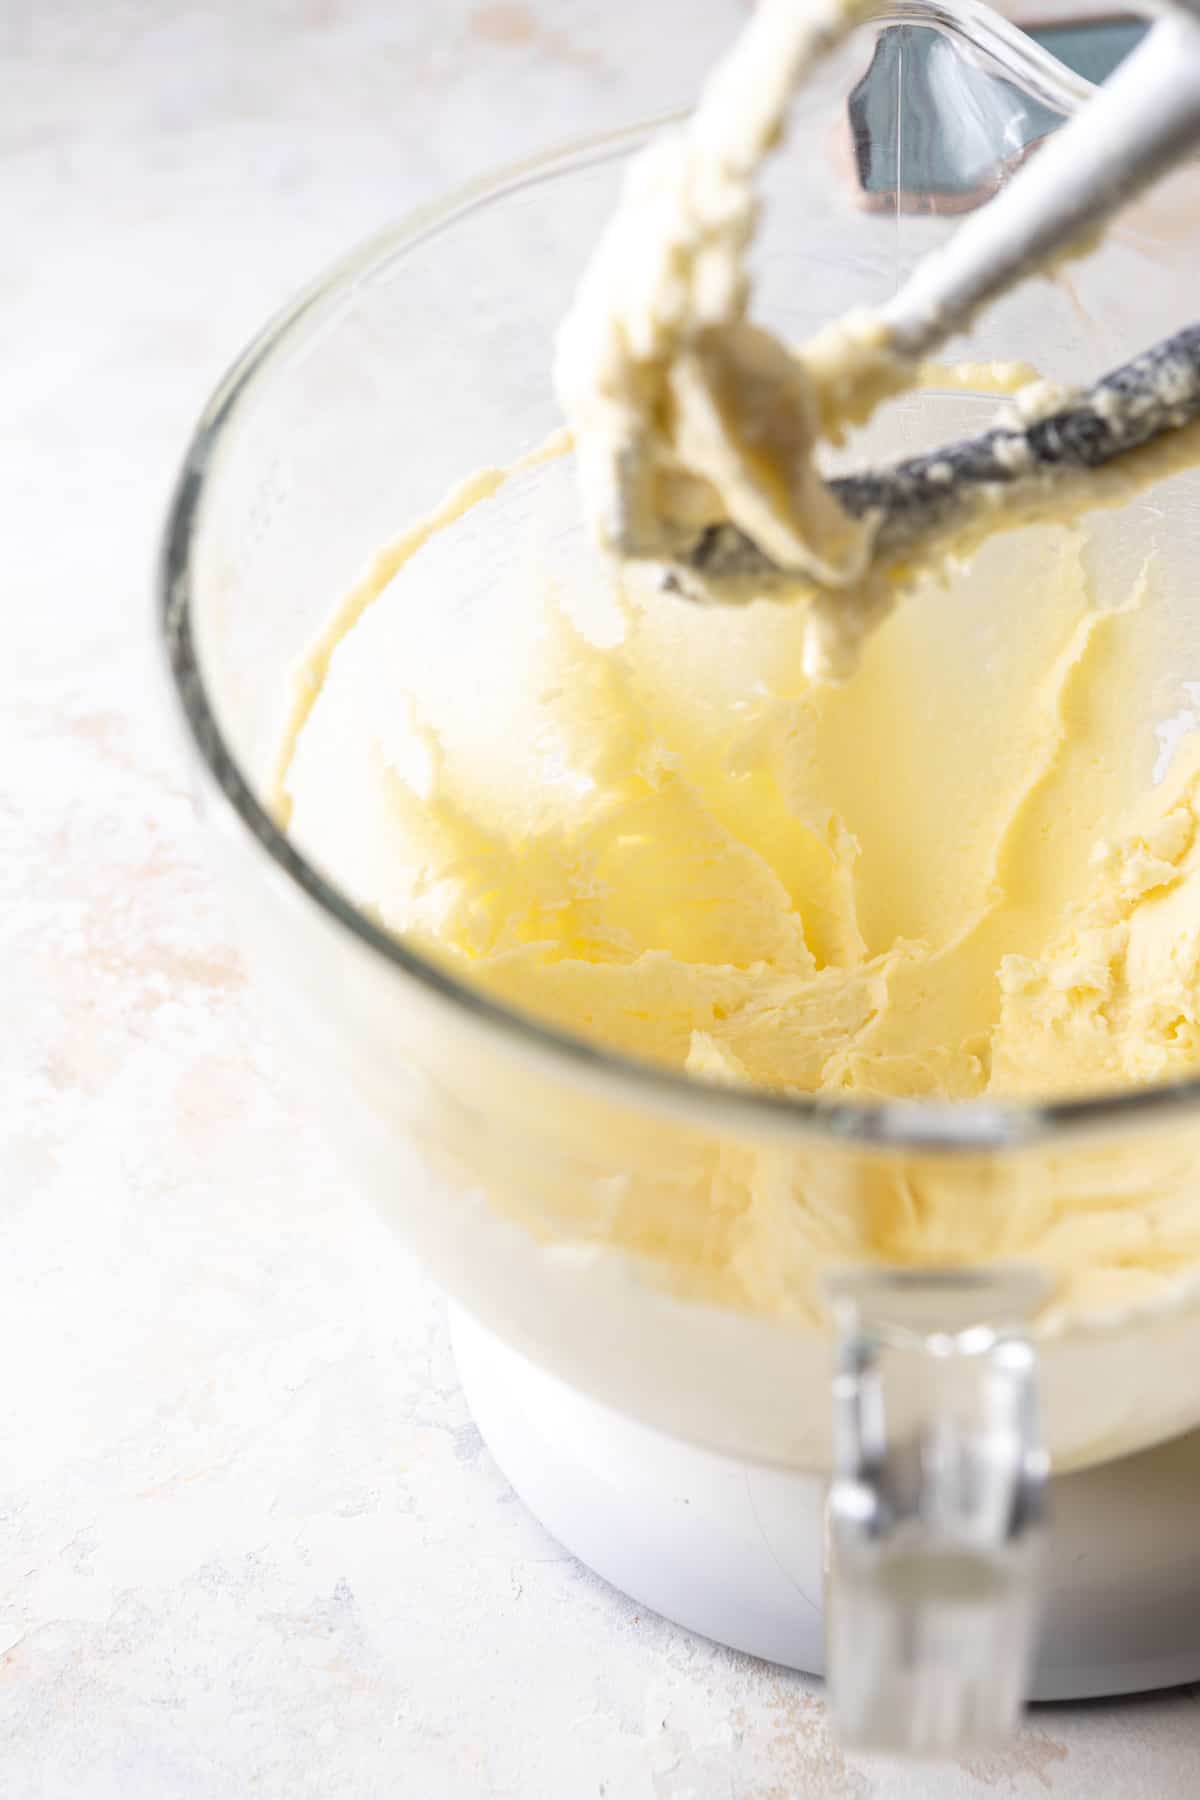 Butter and sugar creamed together in the bowl of a stand mixer.